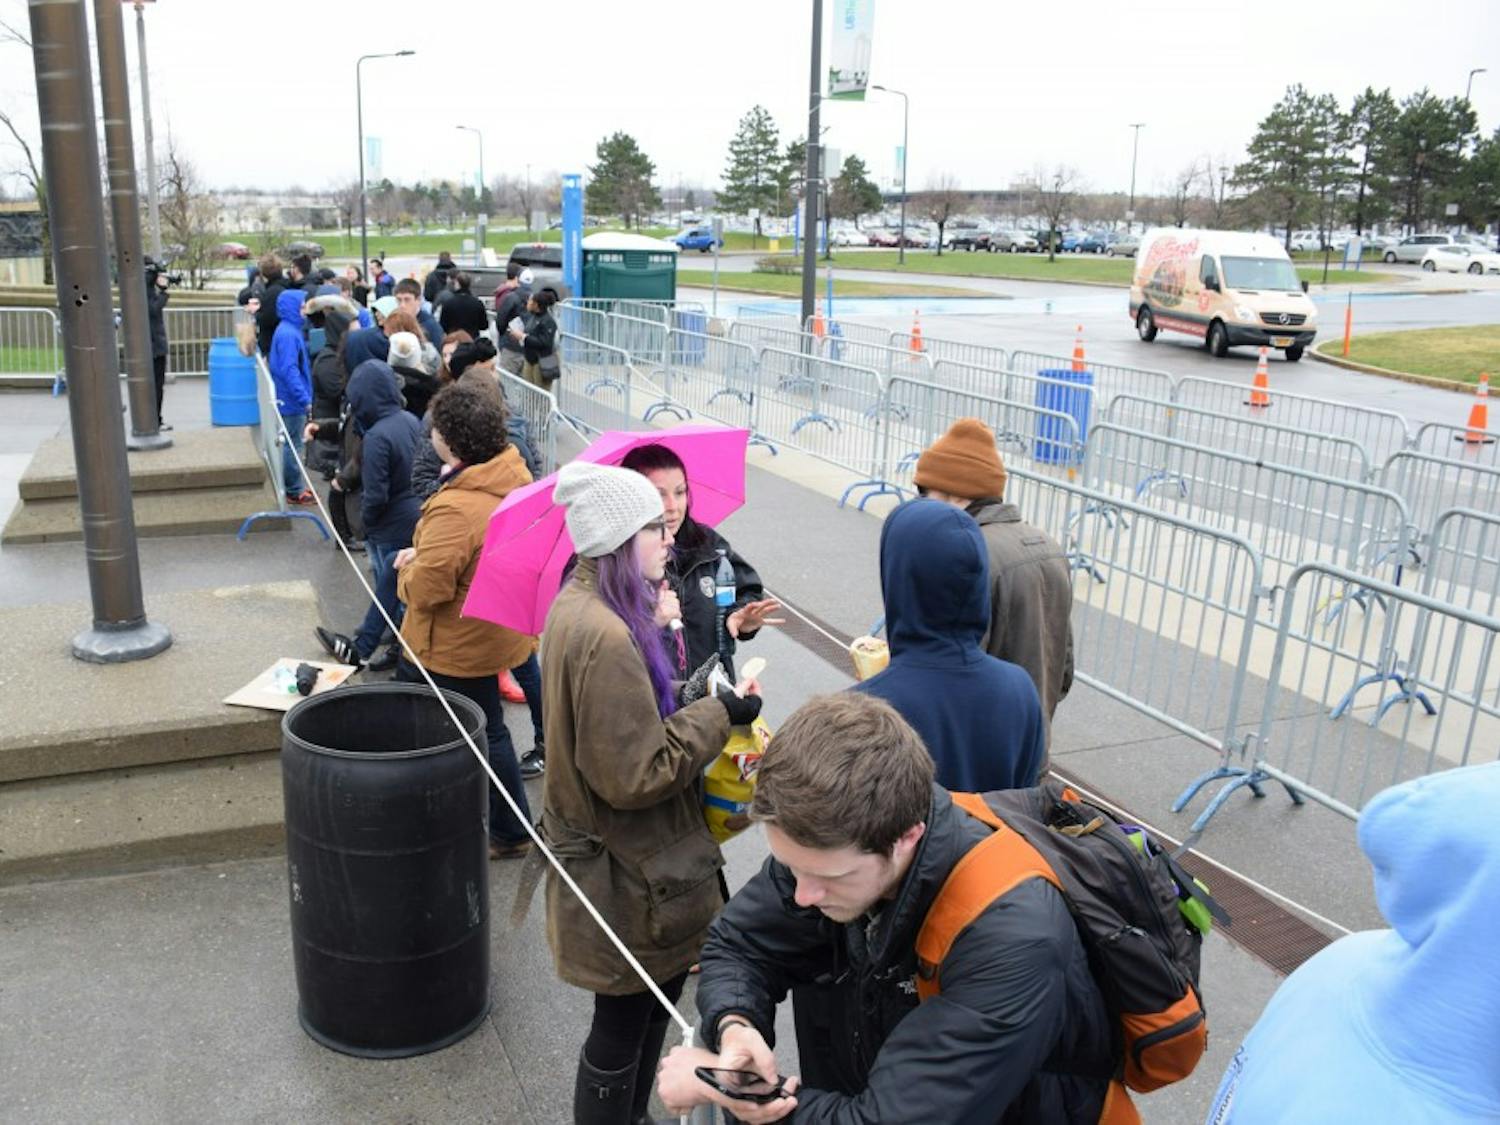 People begin lining up outside Alumni Arena for Bernie Sanders' rally&nbsp;Monday morning. Doors open at 4 p.m. and Sanders will speak at 7 p.m.&nbsp;